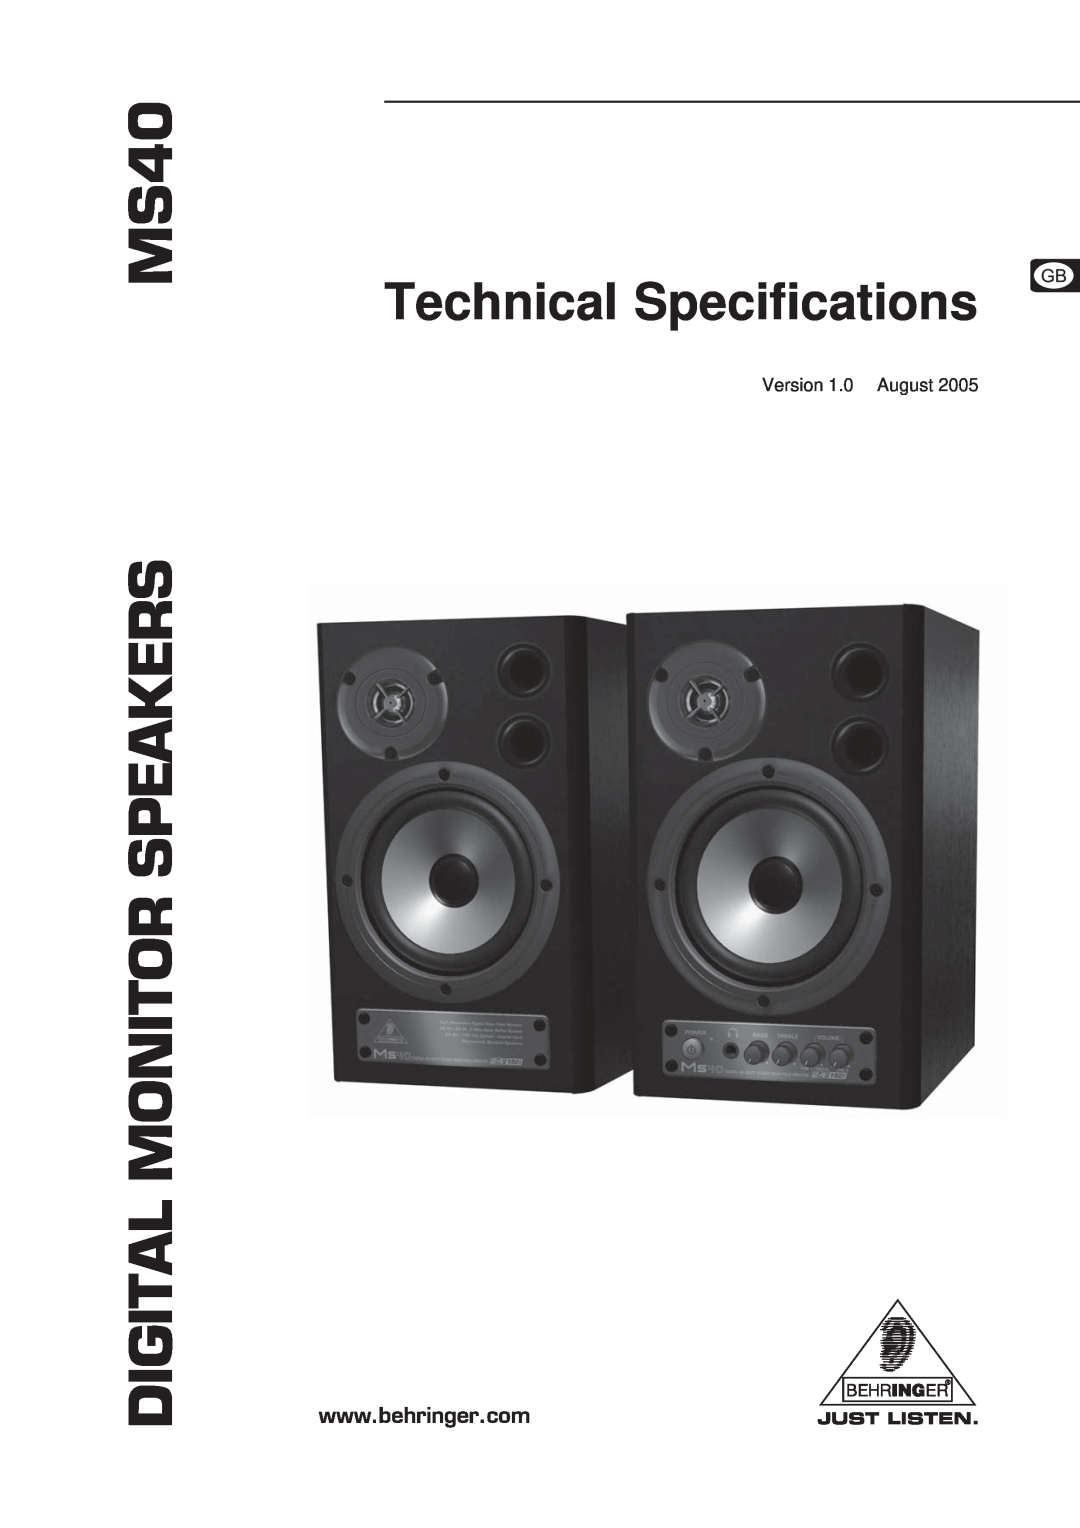 Behringer MS40 technical specifications Version 1.0 August, Digital Monitor Speakers, Technical Specifications 